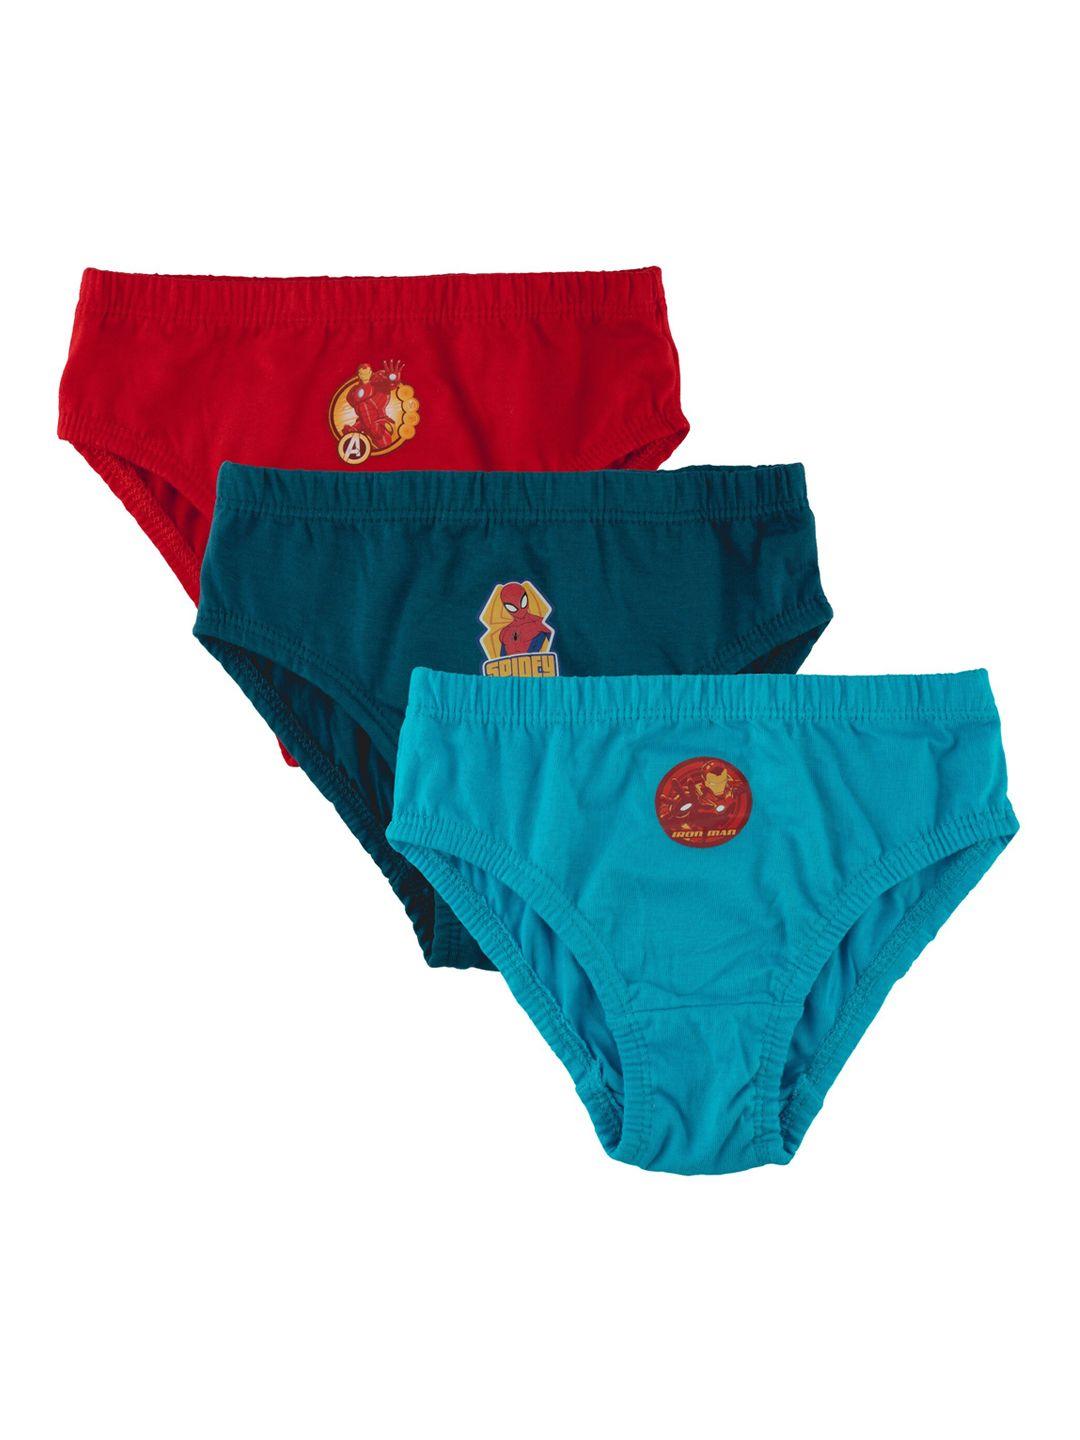 nuluv-boys-pack-of-3-assorted-pure-cotton-basic-briefs